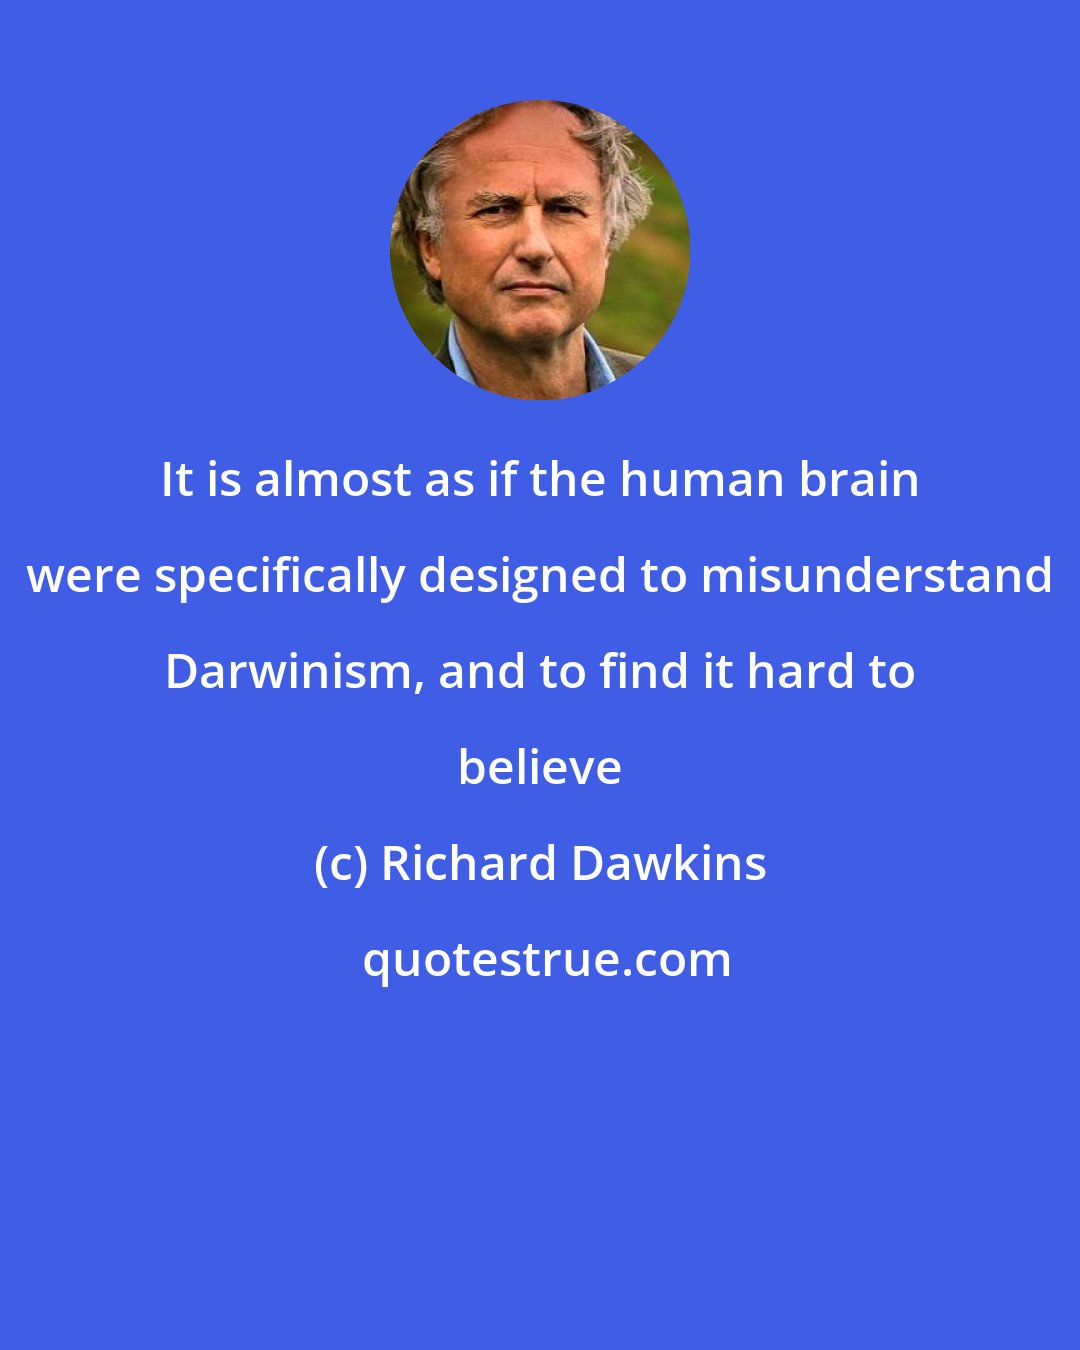 Richard Dawkins: It is almost as if the human brain were specifically designed to misunderstand Darwinism, and to find it hard to believe